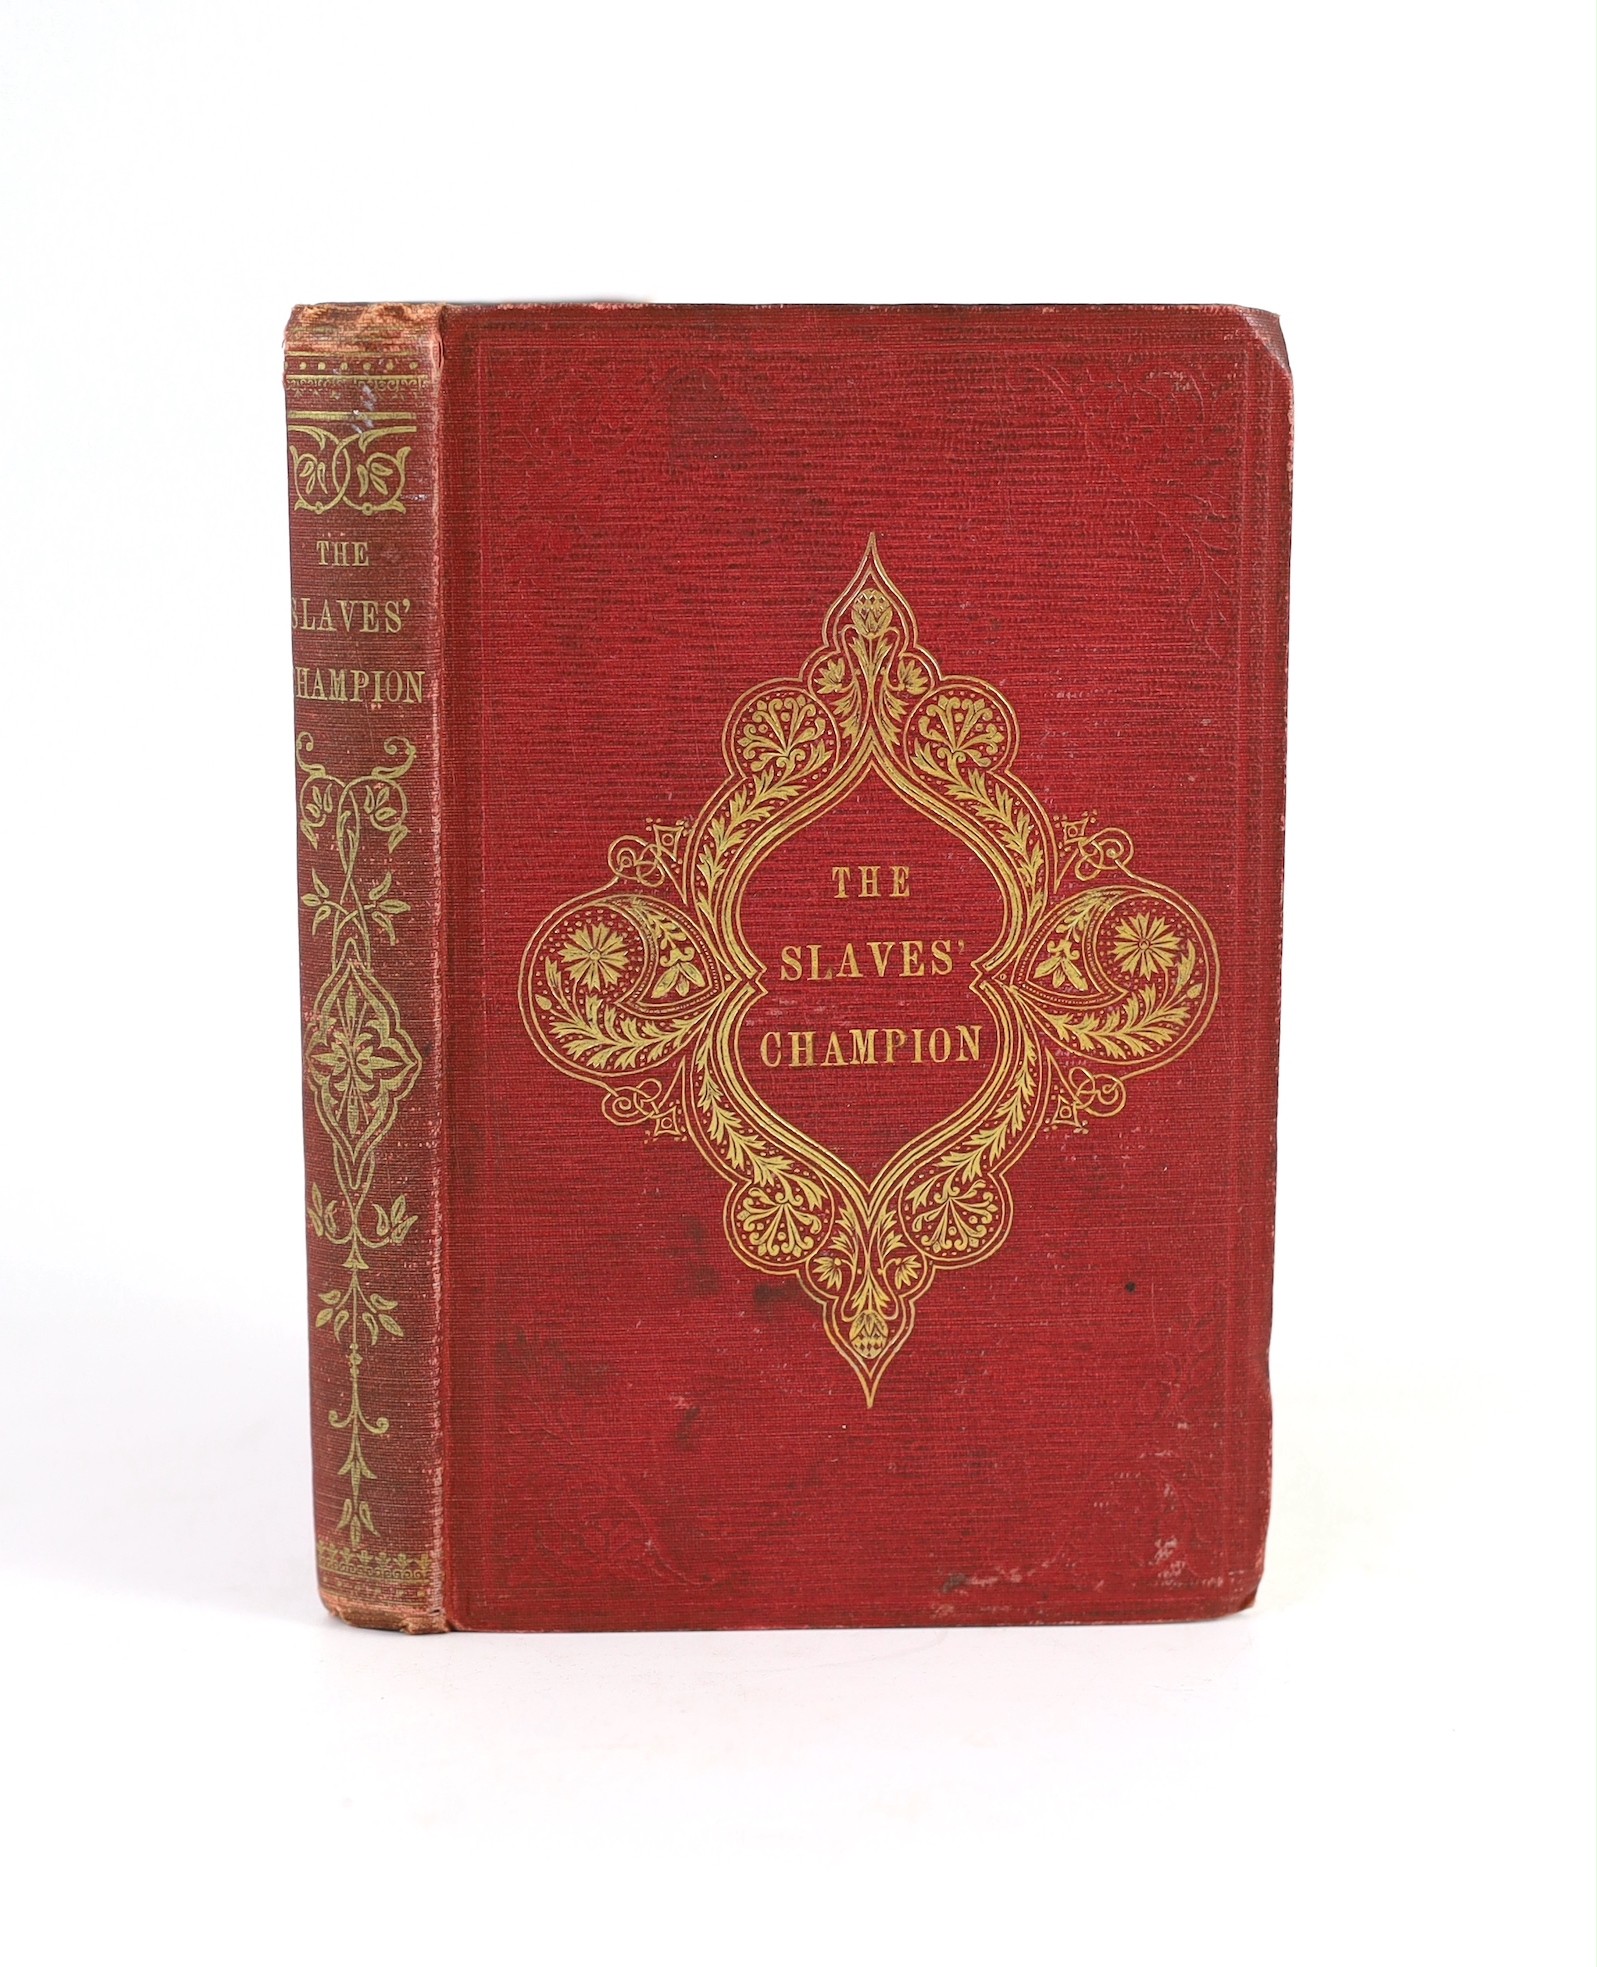 Wheeler, Henry M. - The Slaves’ Champion, or, The Life, Deeds, and Historical Dats of William Wilberforce, 12mo, original red cloth, Seeleys, London, 1859